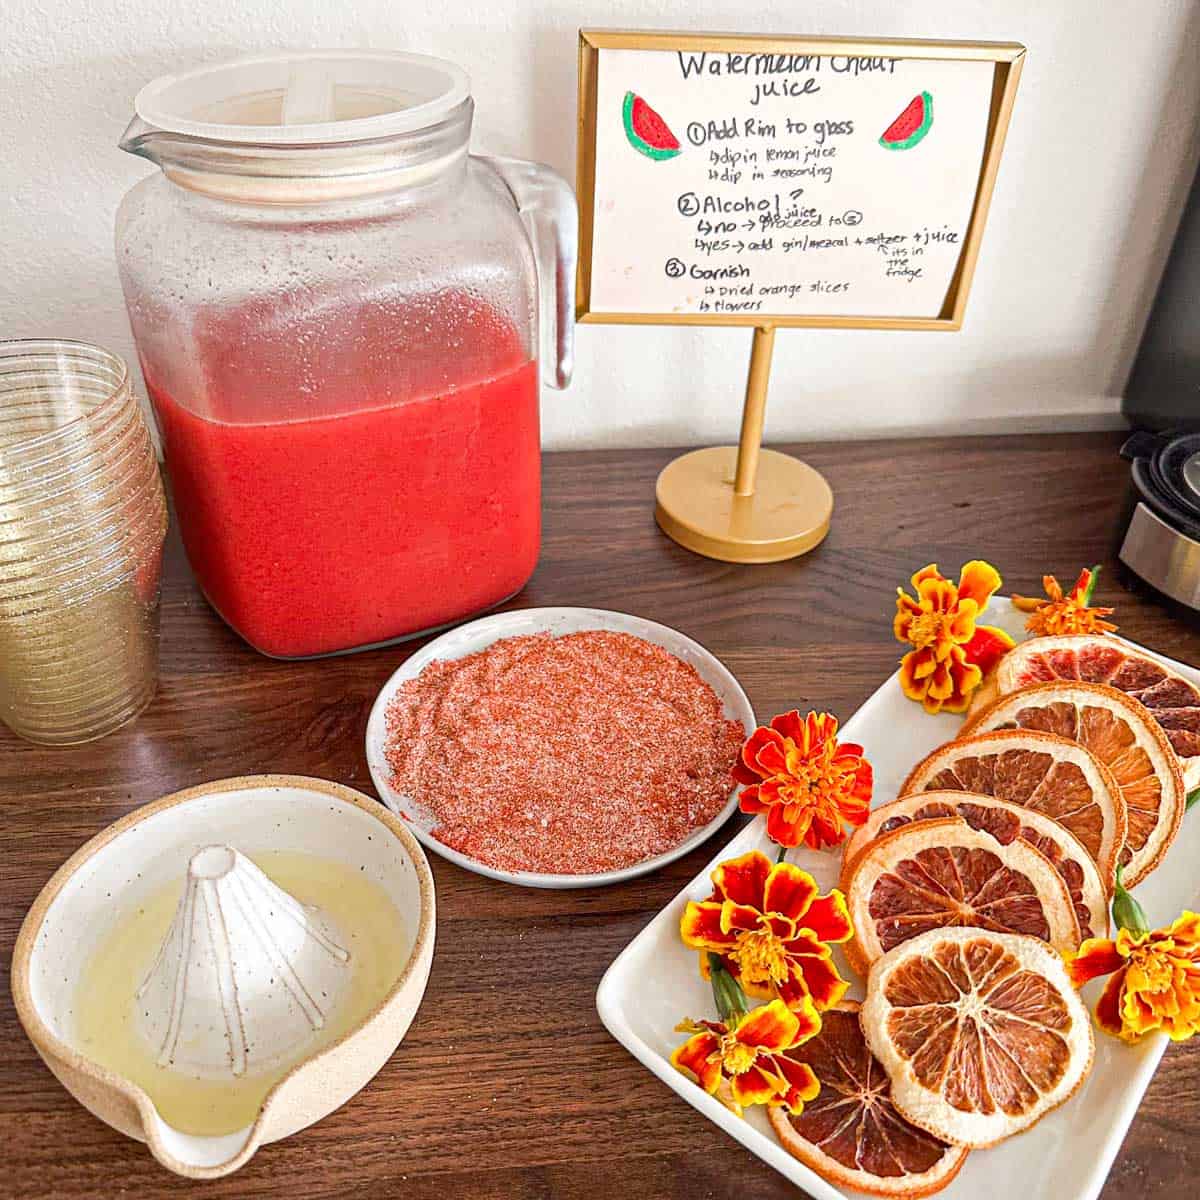 A pitcher of Indian style watermelon juice setup for a party. A sign in the back telling guests how to create a drink along with spices for rim and garnishes.